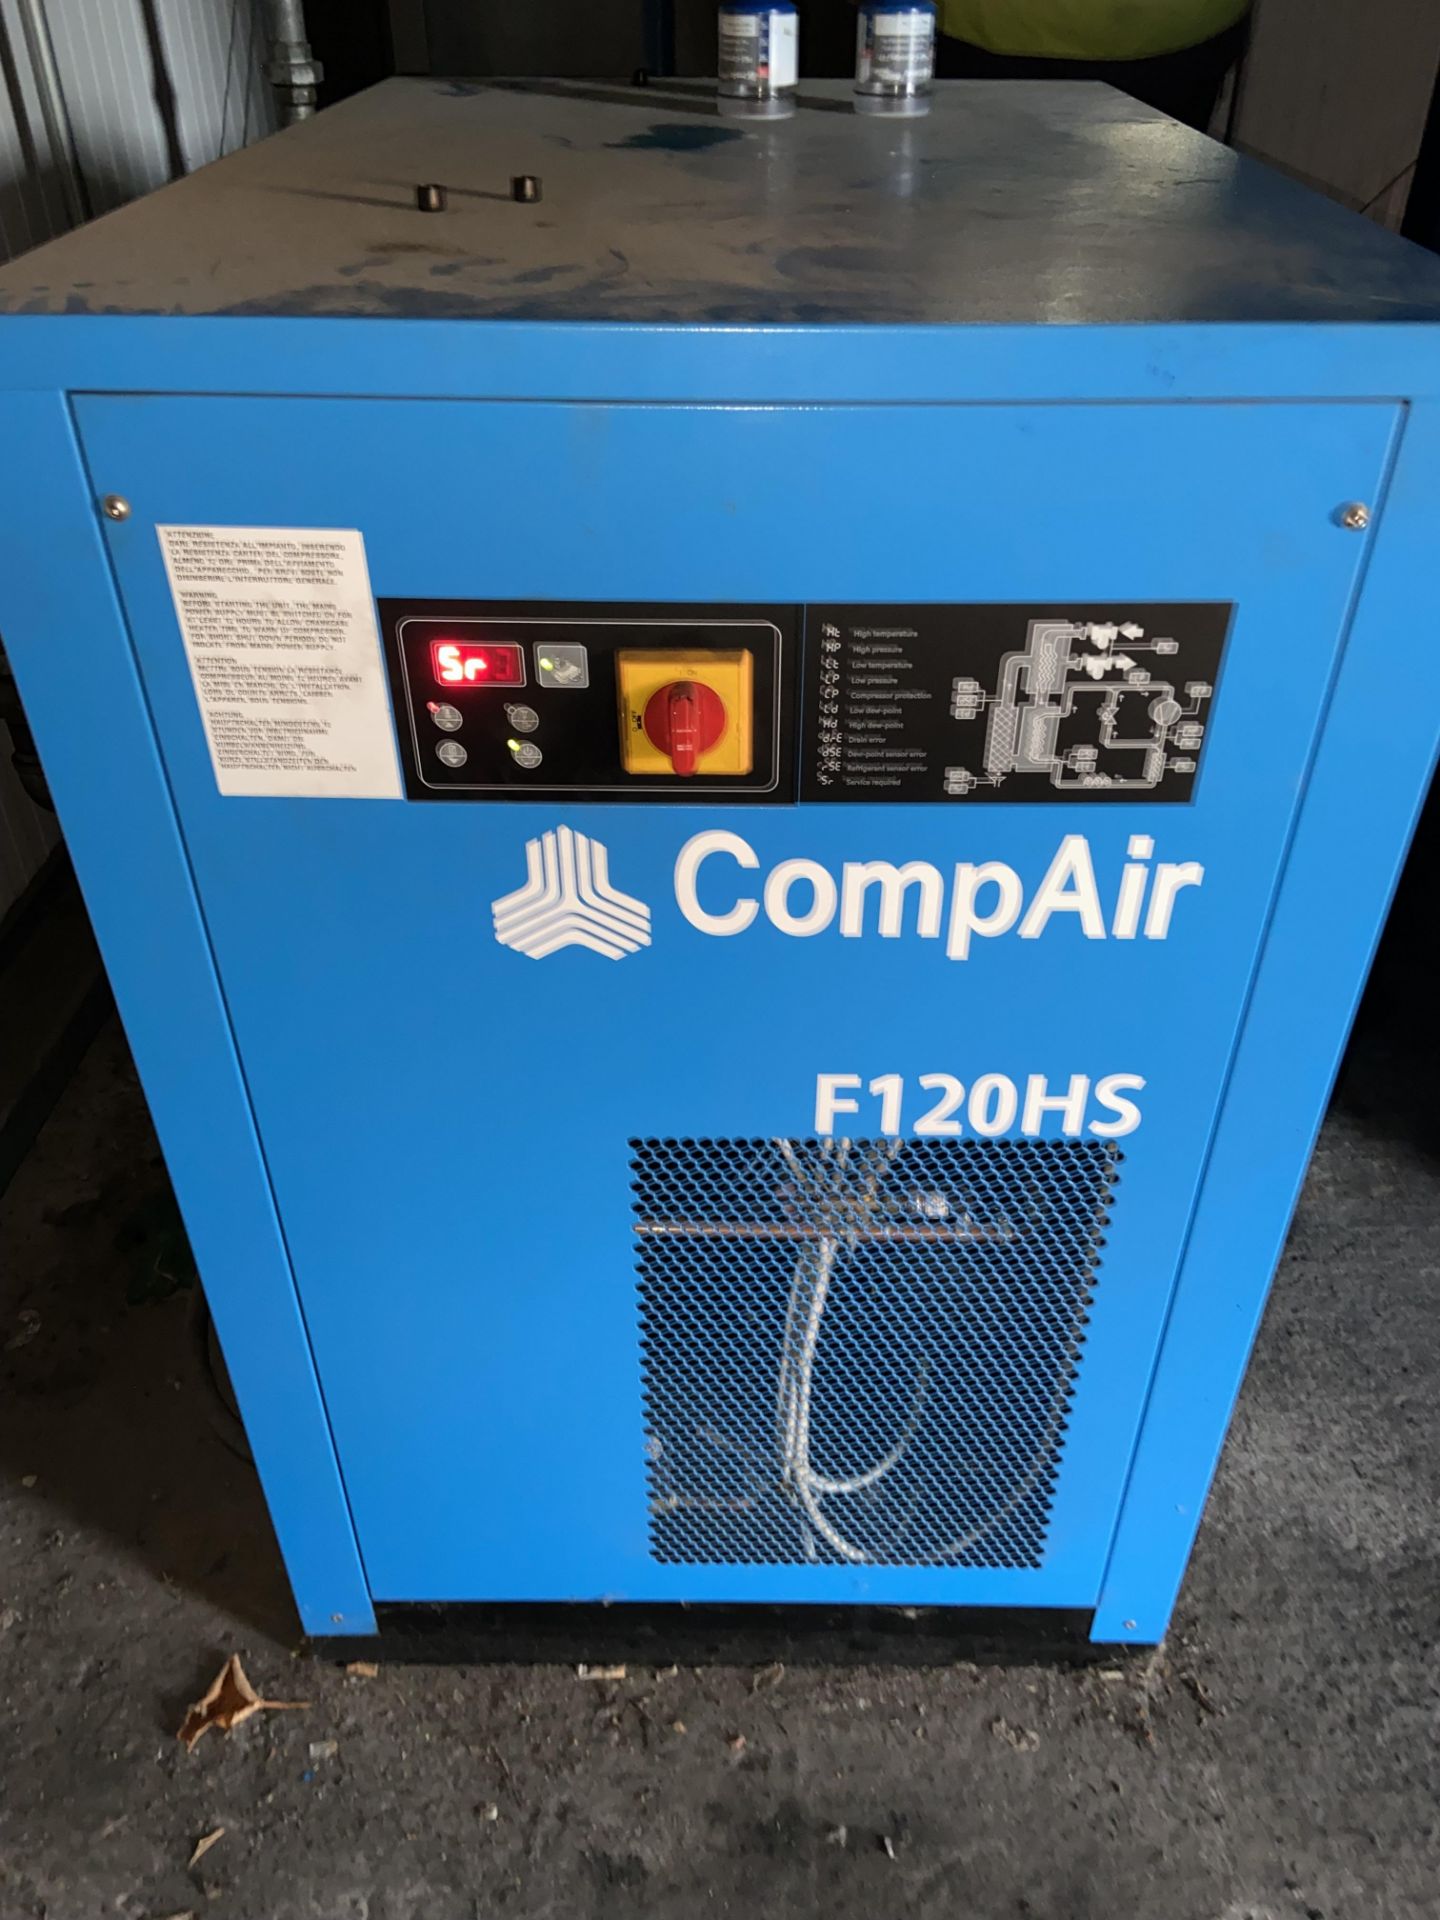 CompAir F120HS PACKAGED AIR DRYER, serial no. 398781180001, year of manufacture understood to be - Image 2 of 4